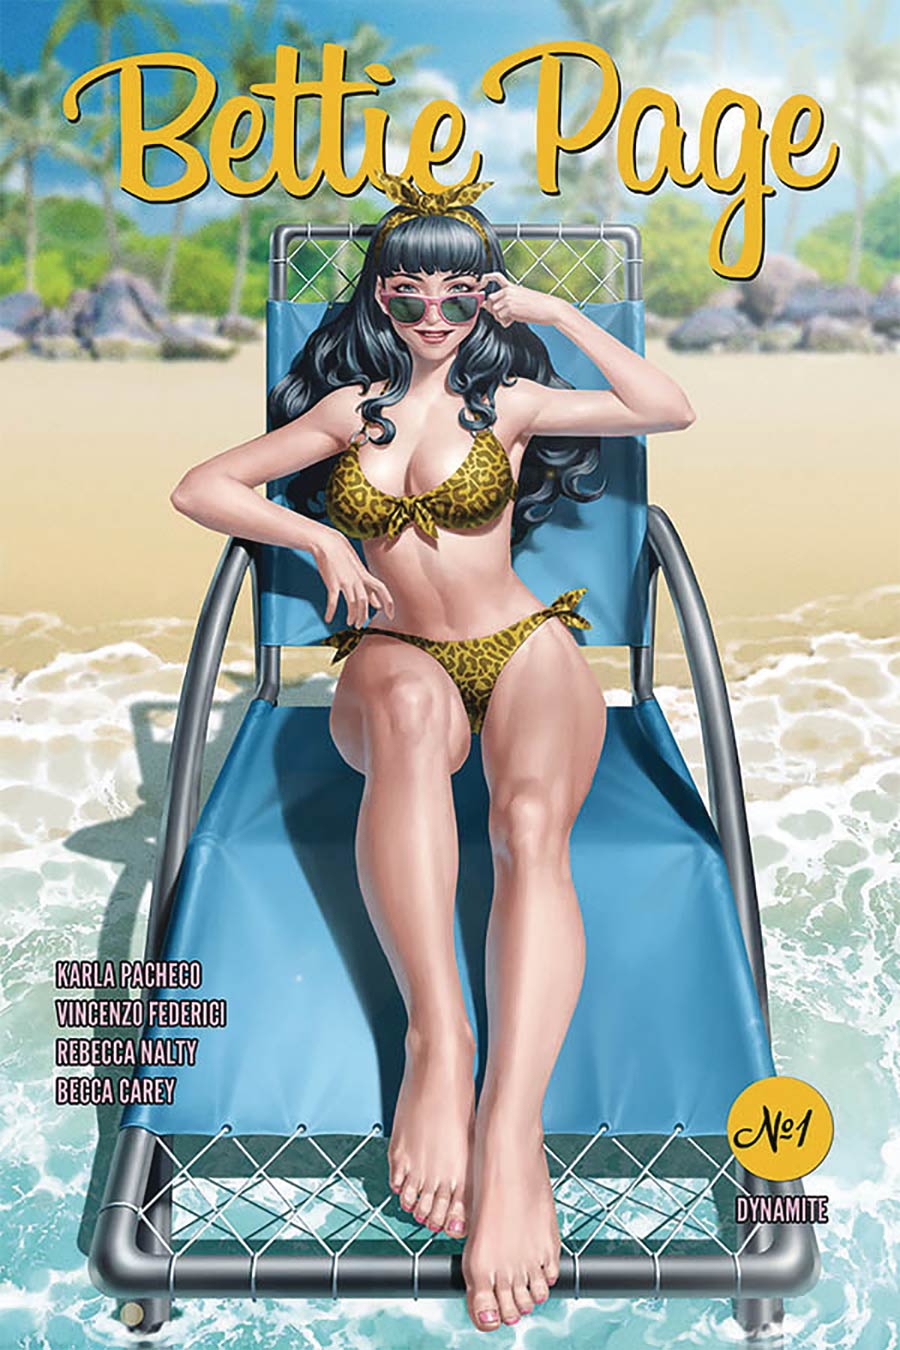 Bettie Page #1 (2020)